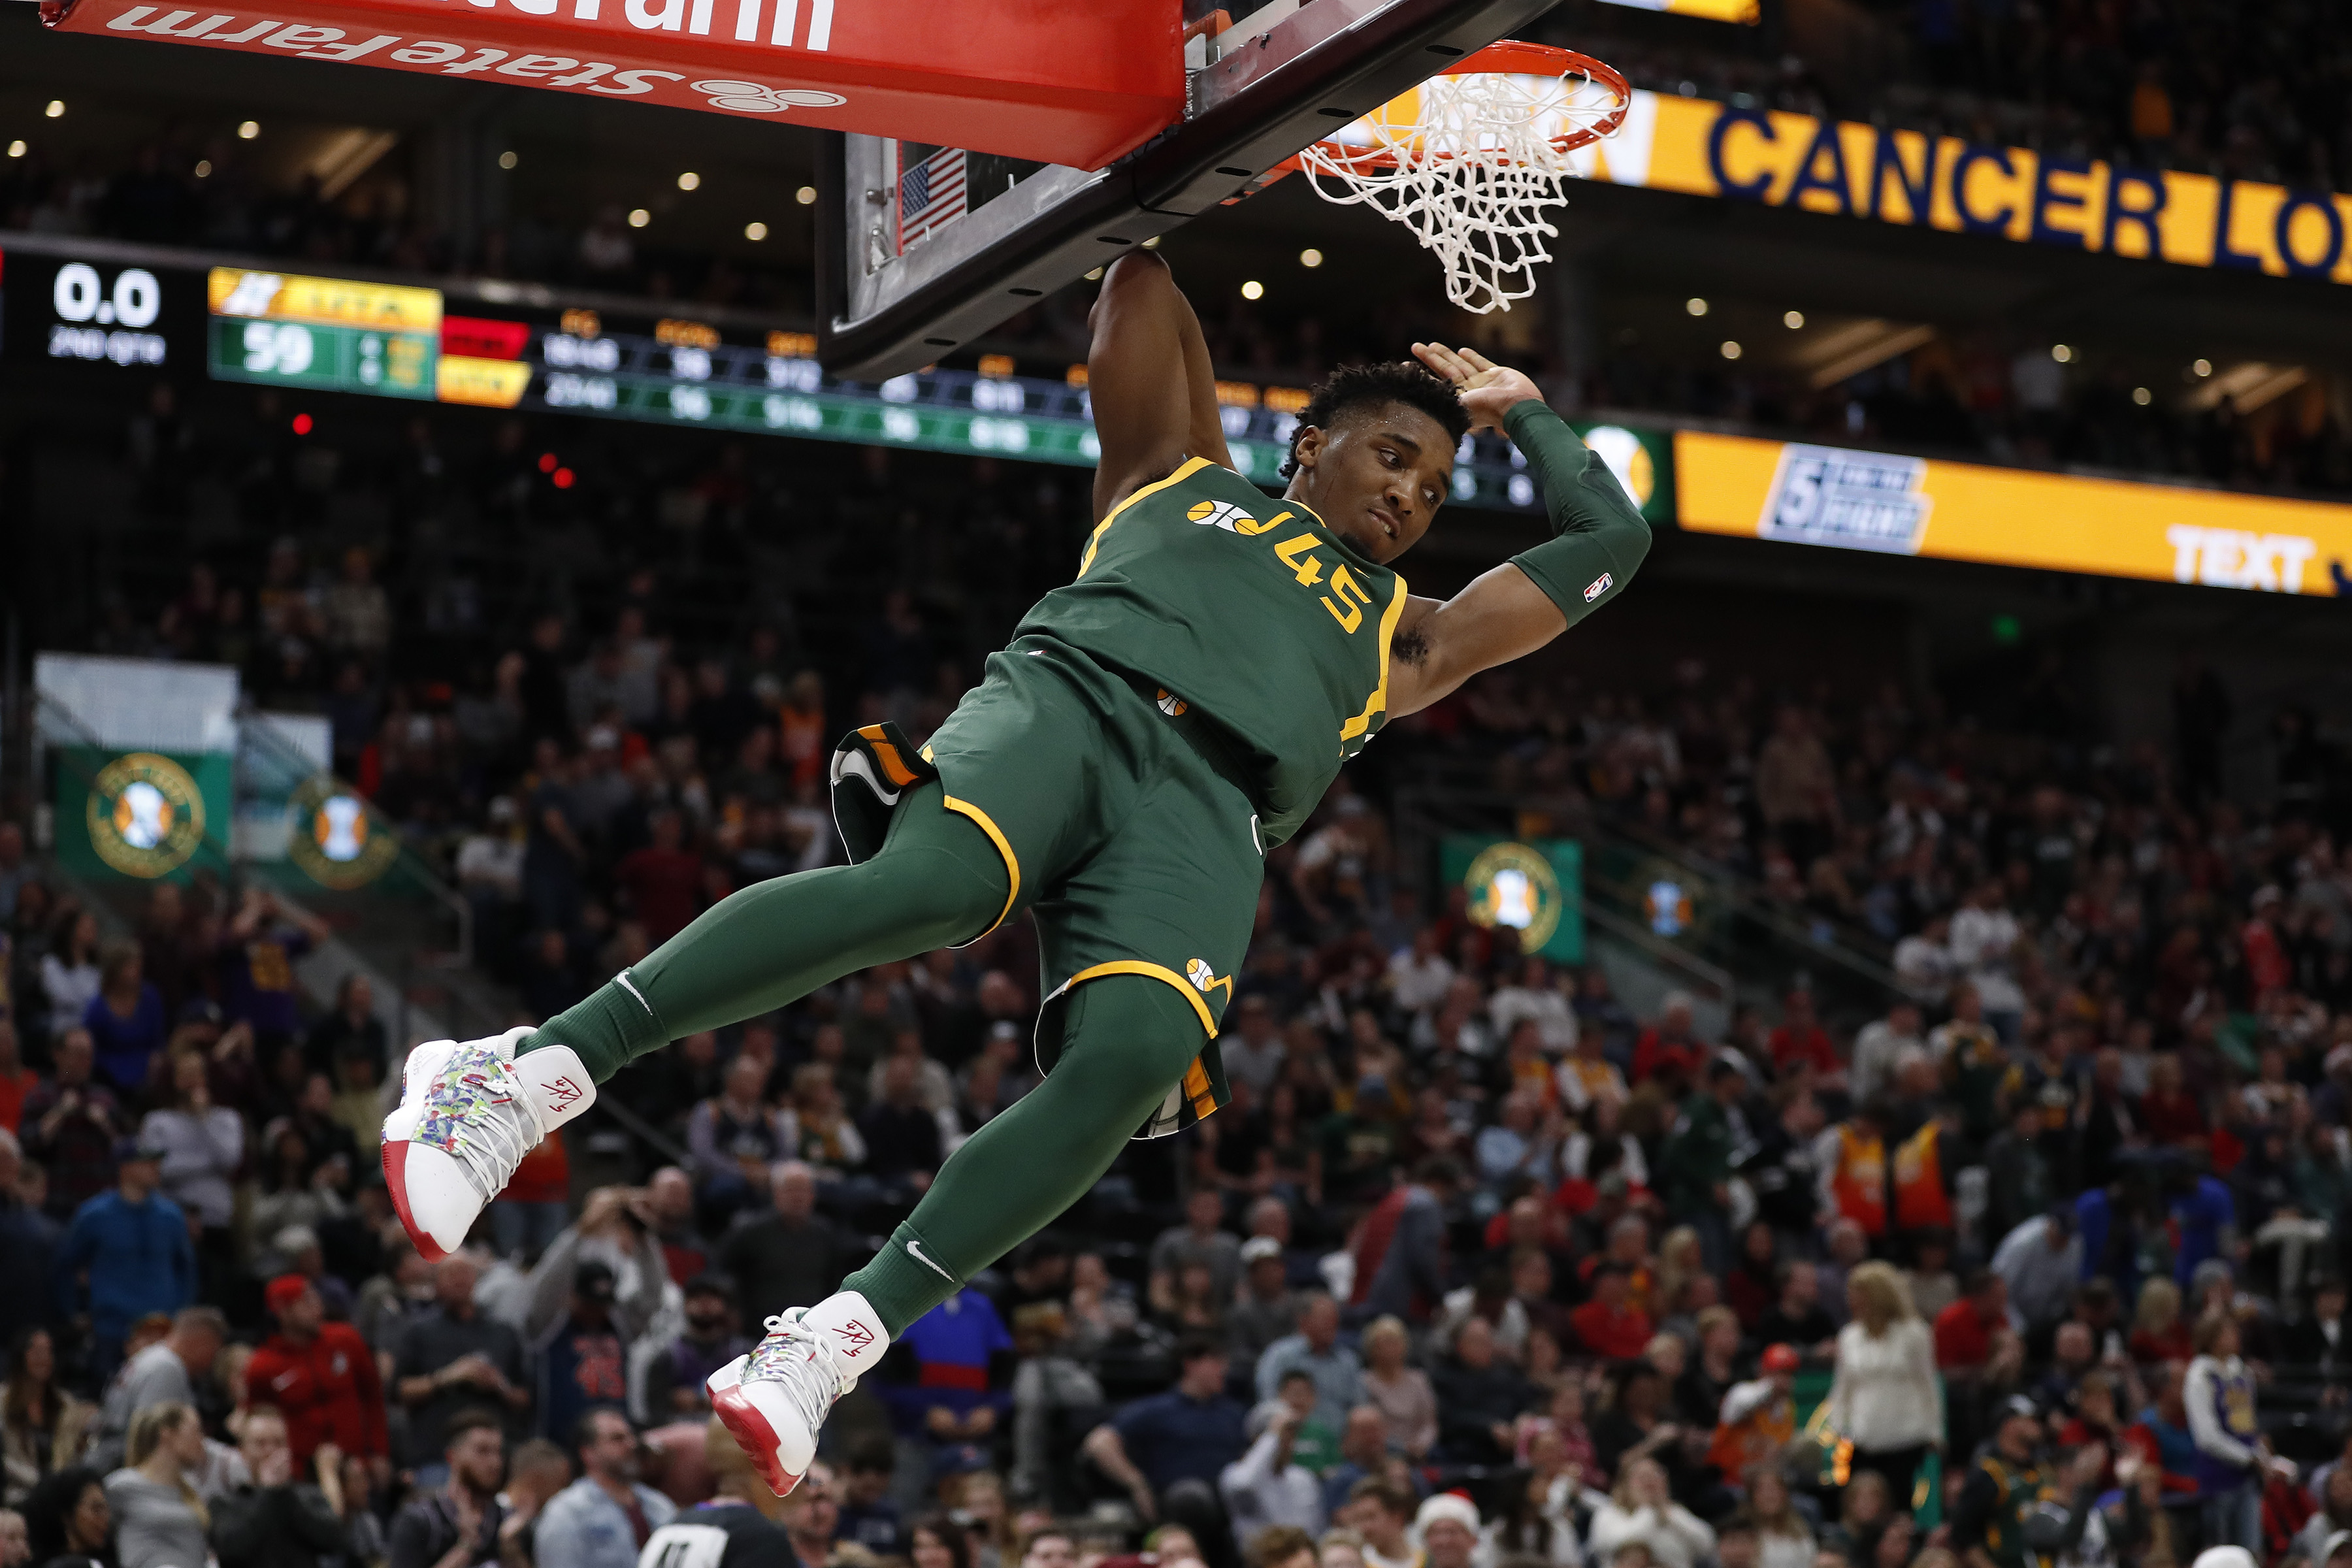 Basketball World Reacts To Donovan Mitchell's Insane Dunk - The